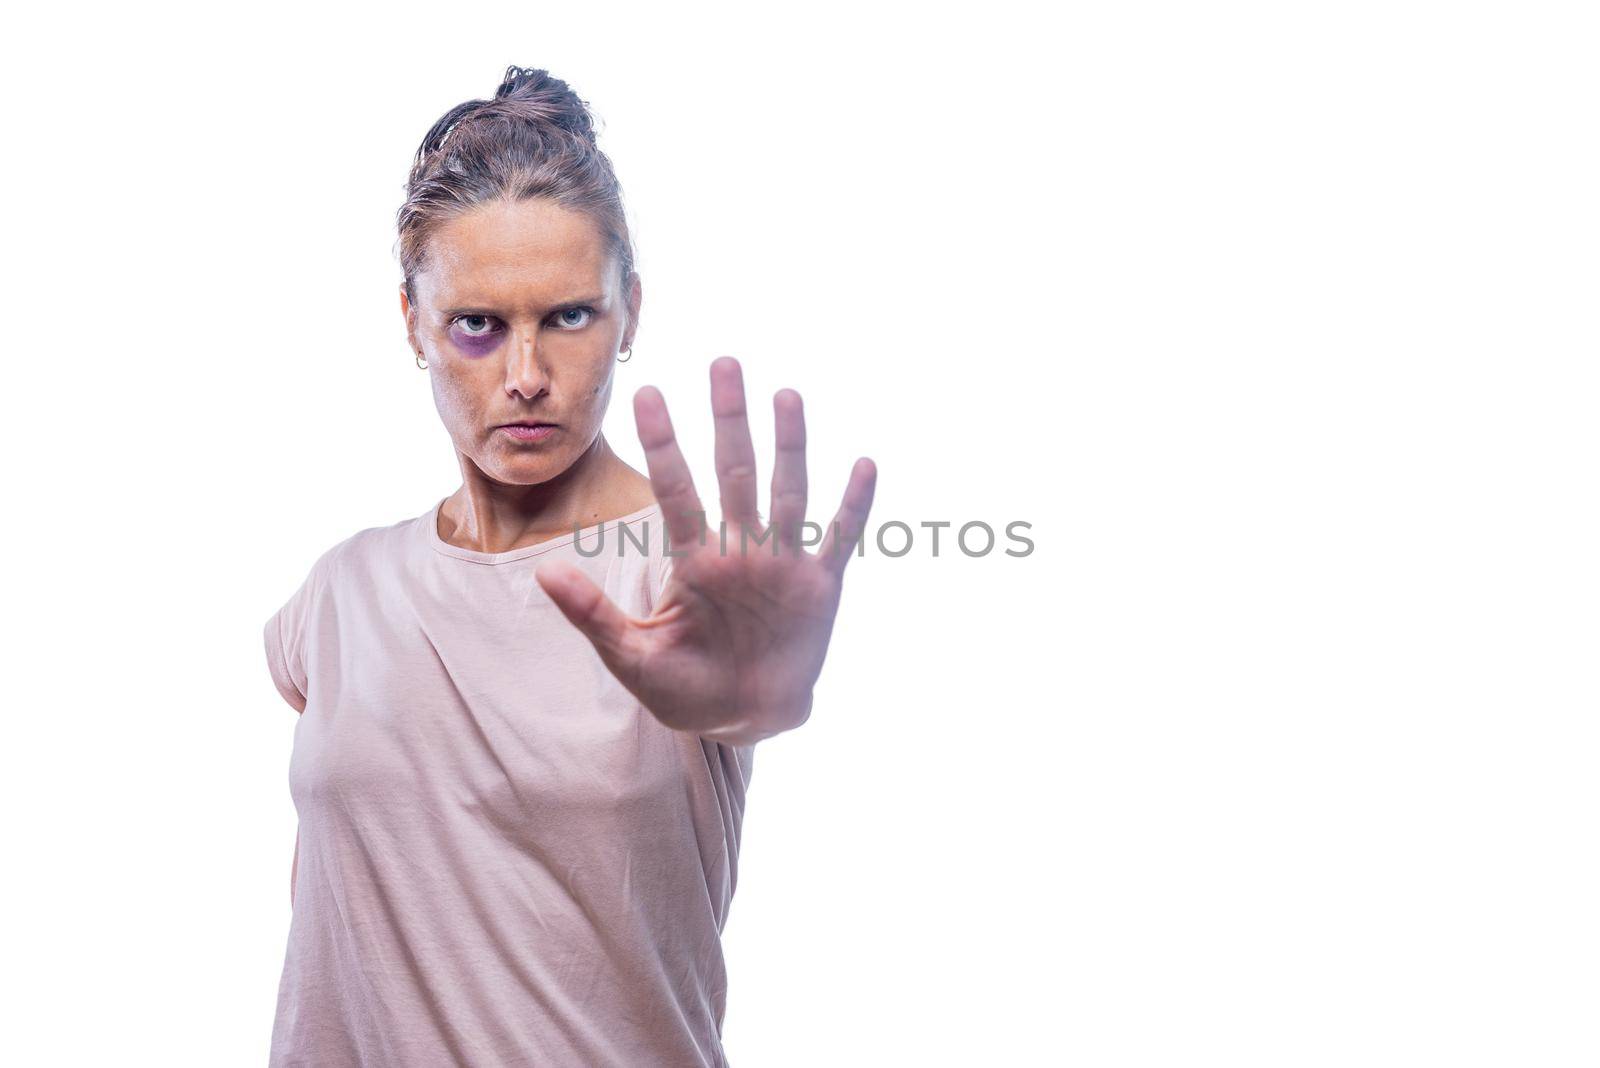 woman with bruised eye showing stop sign against gender abuse by ivanmoreno